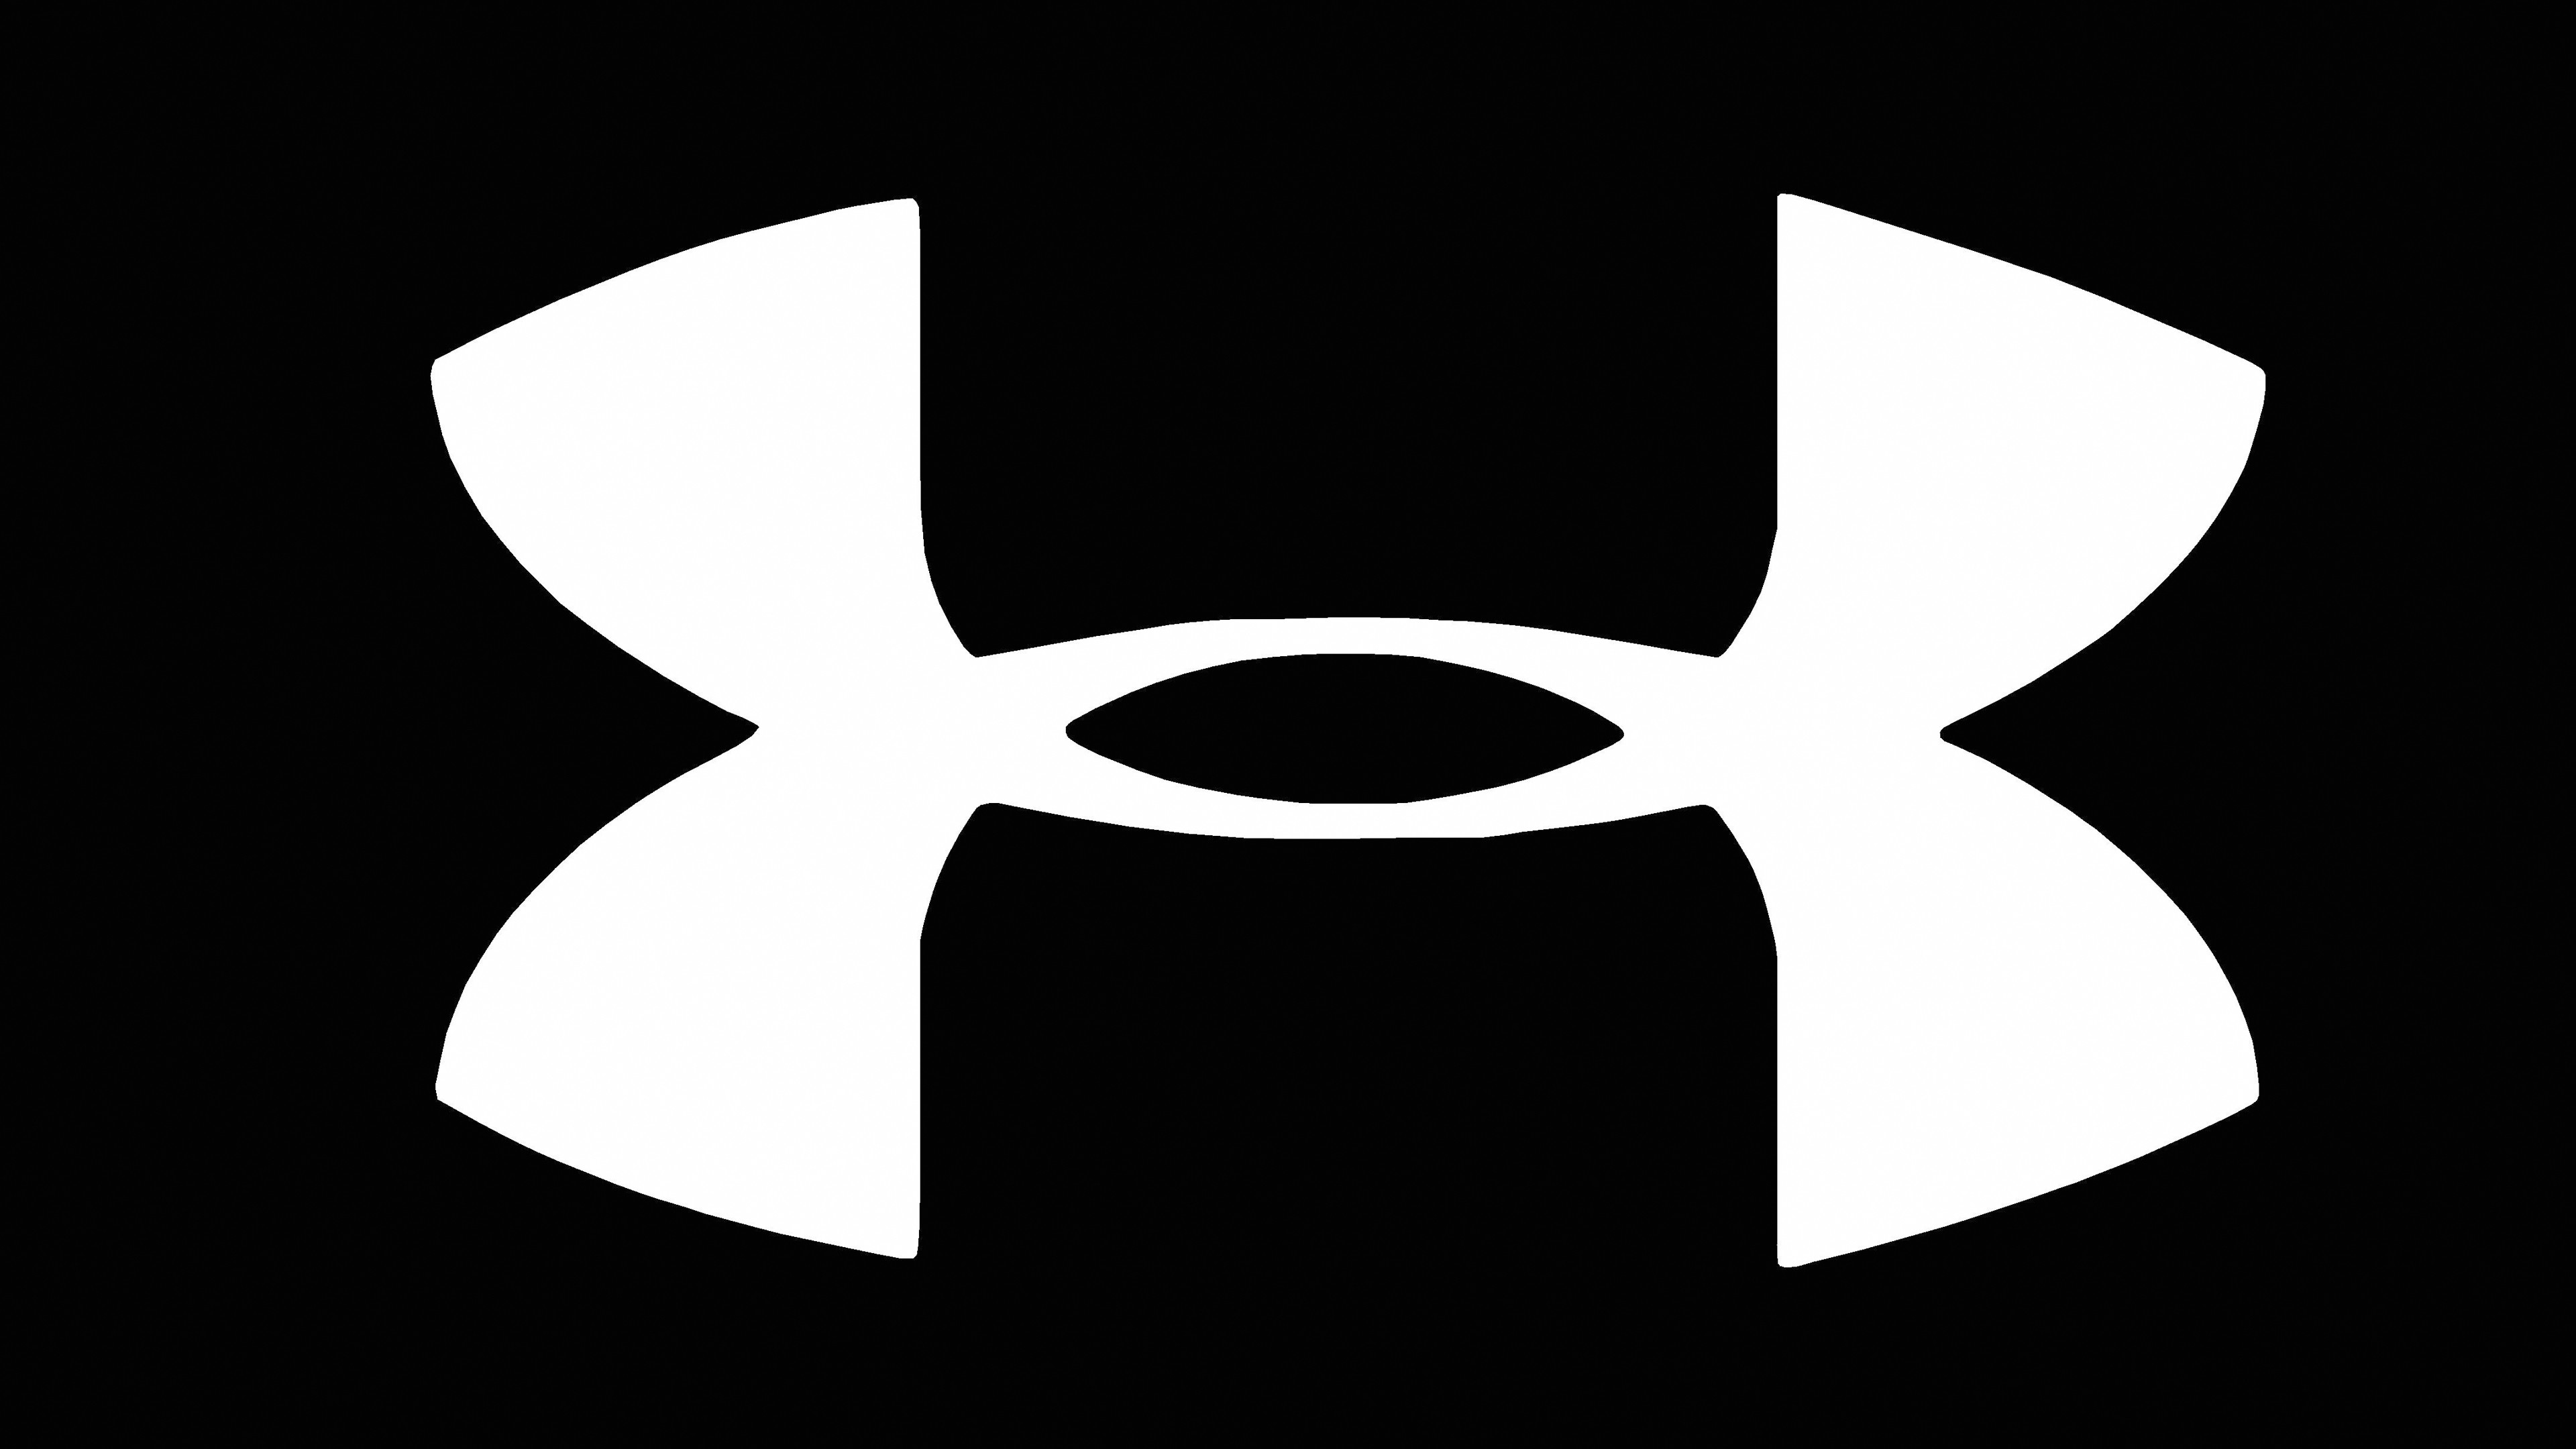 Under Armour Wallpaper 2018 (72+ pictures)